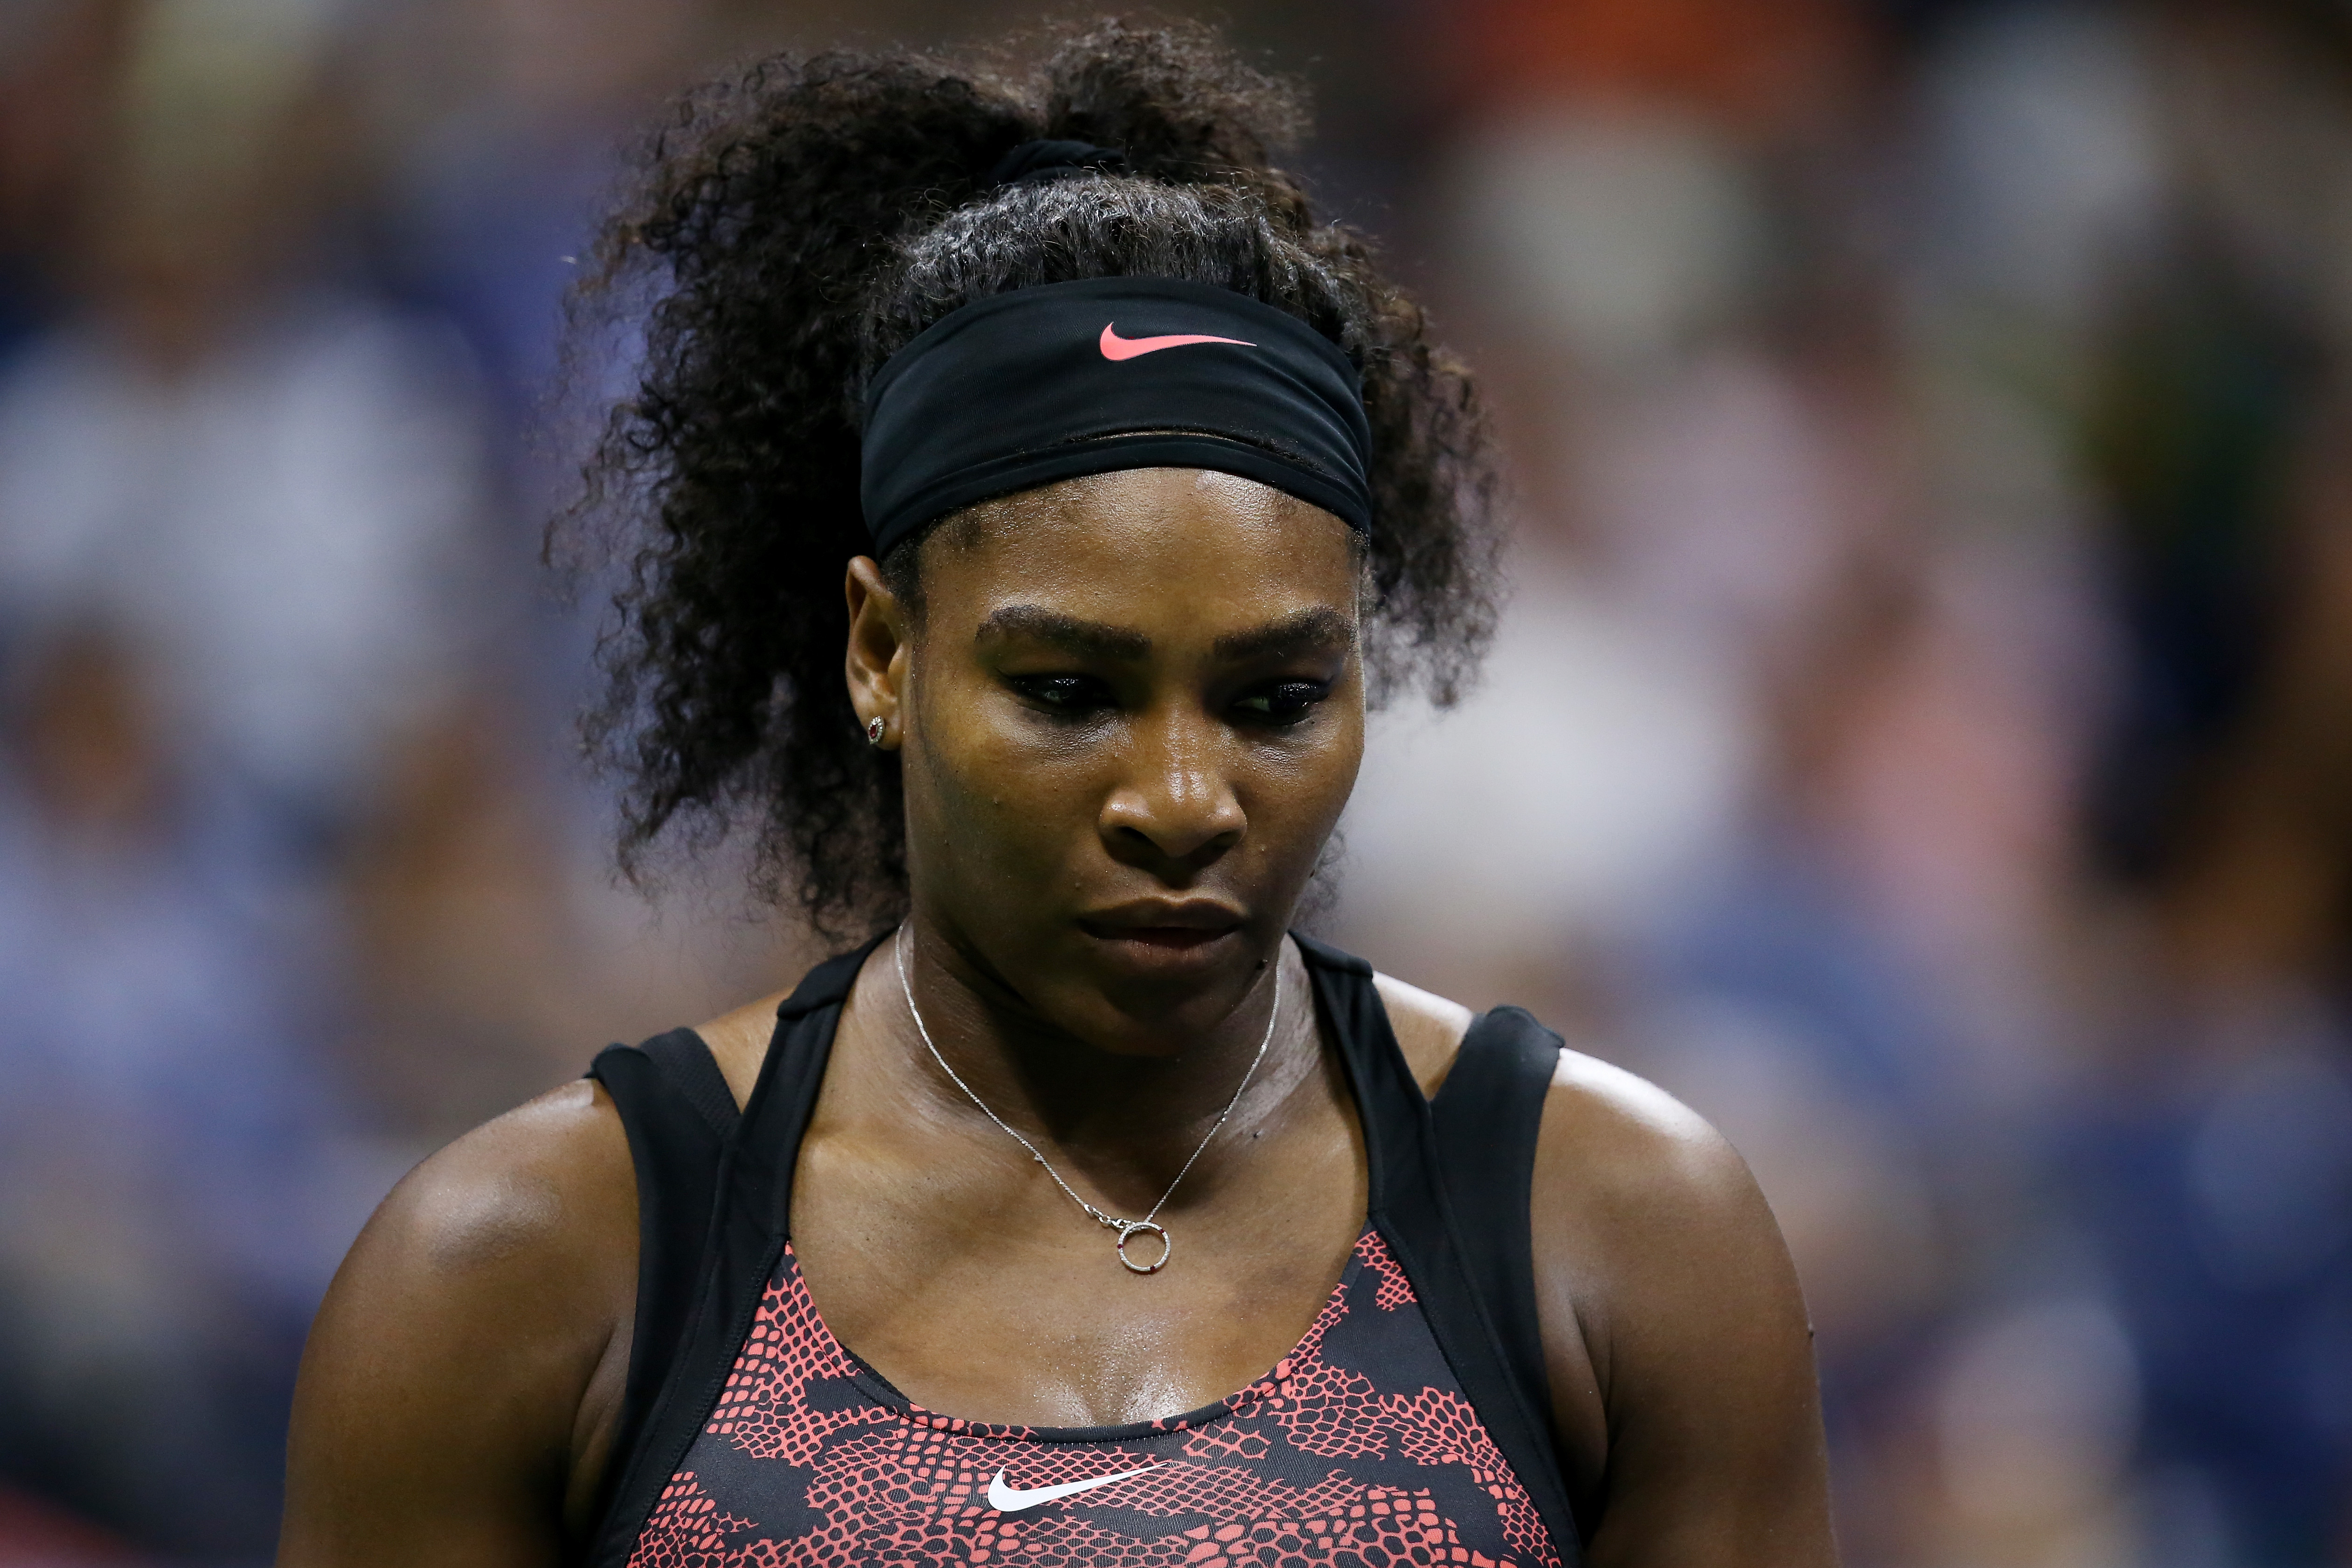 NEW YORK, NY - SEPTEMBER 08: Serena Williams of the United States looks on against Venus Williams of the United States during their Women's Singles Quarterfinals match on Day Nine of the 2015 US Open at the USTA Billie Jean King National Tennis Center on September 8, 2015 in the Flushing neighborhood of the Queens borough of New York City. (Photo by Matthew Stockman/Getty Images) ORG XMIT: 571784031 ORIG FILE ID: 487323198